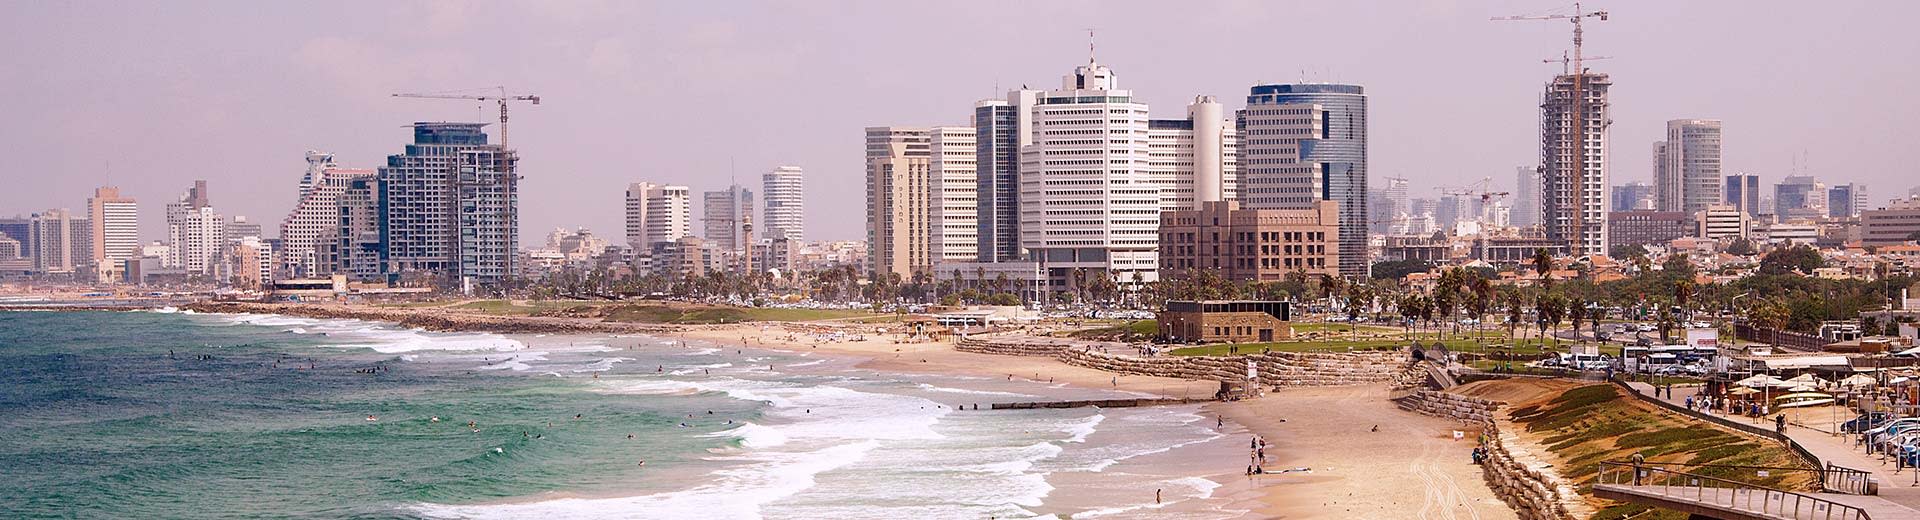 Under a cloudy Tel Aviv sky lie some generic looking skyscrapers and hotels, while a nearly empty beach is in the foreground.